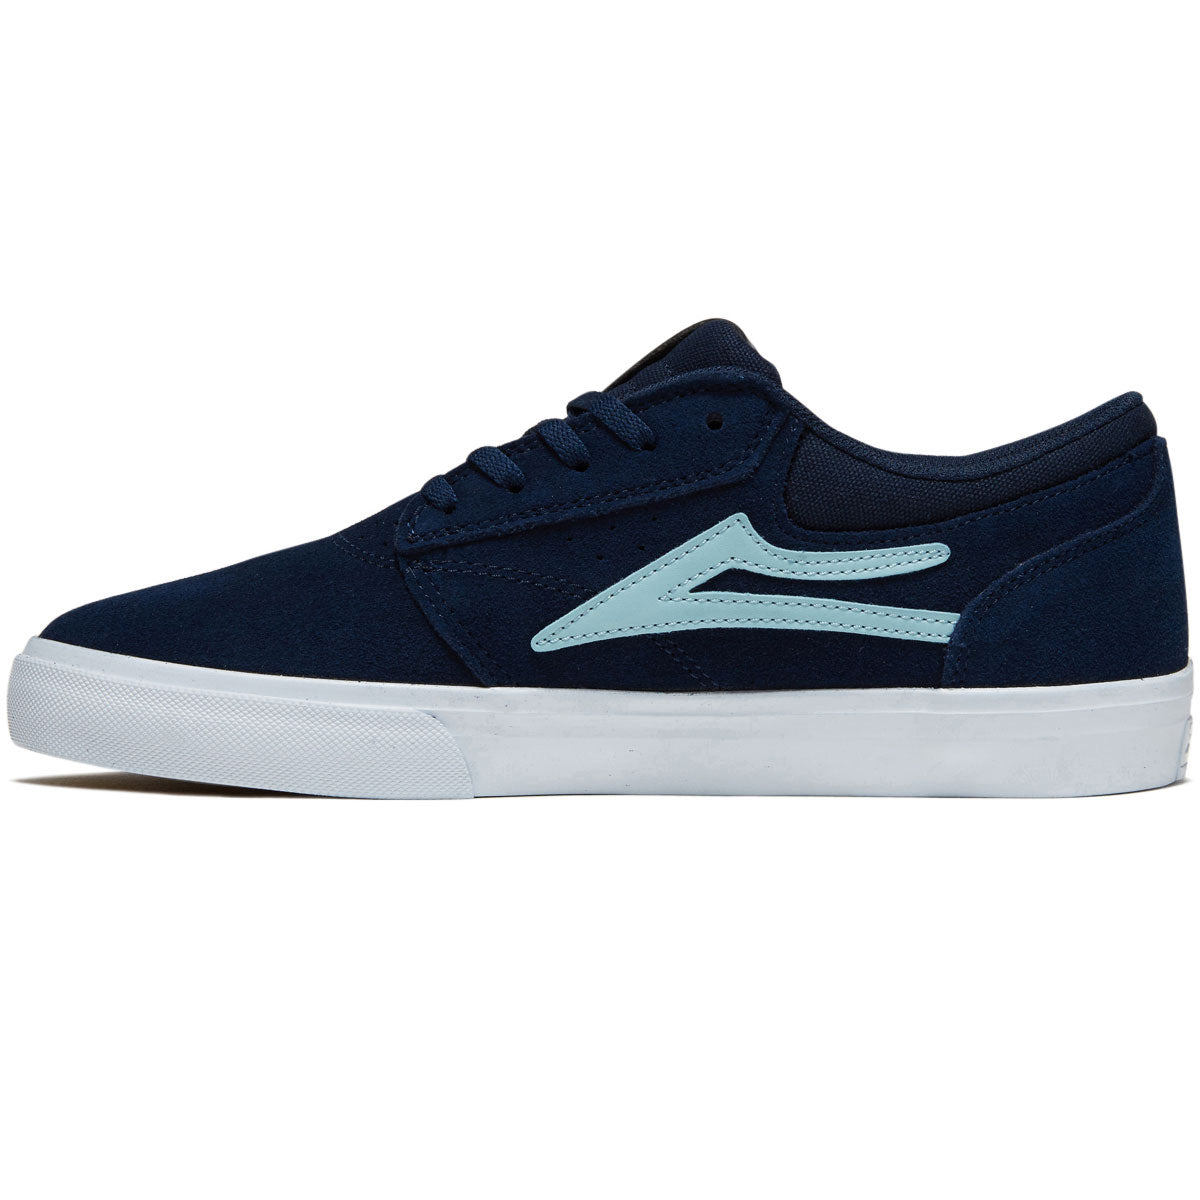 Lakai Griffin Shoes - Suede Navy image 2